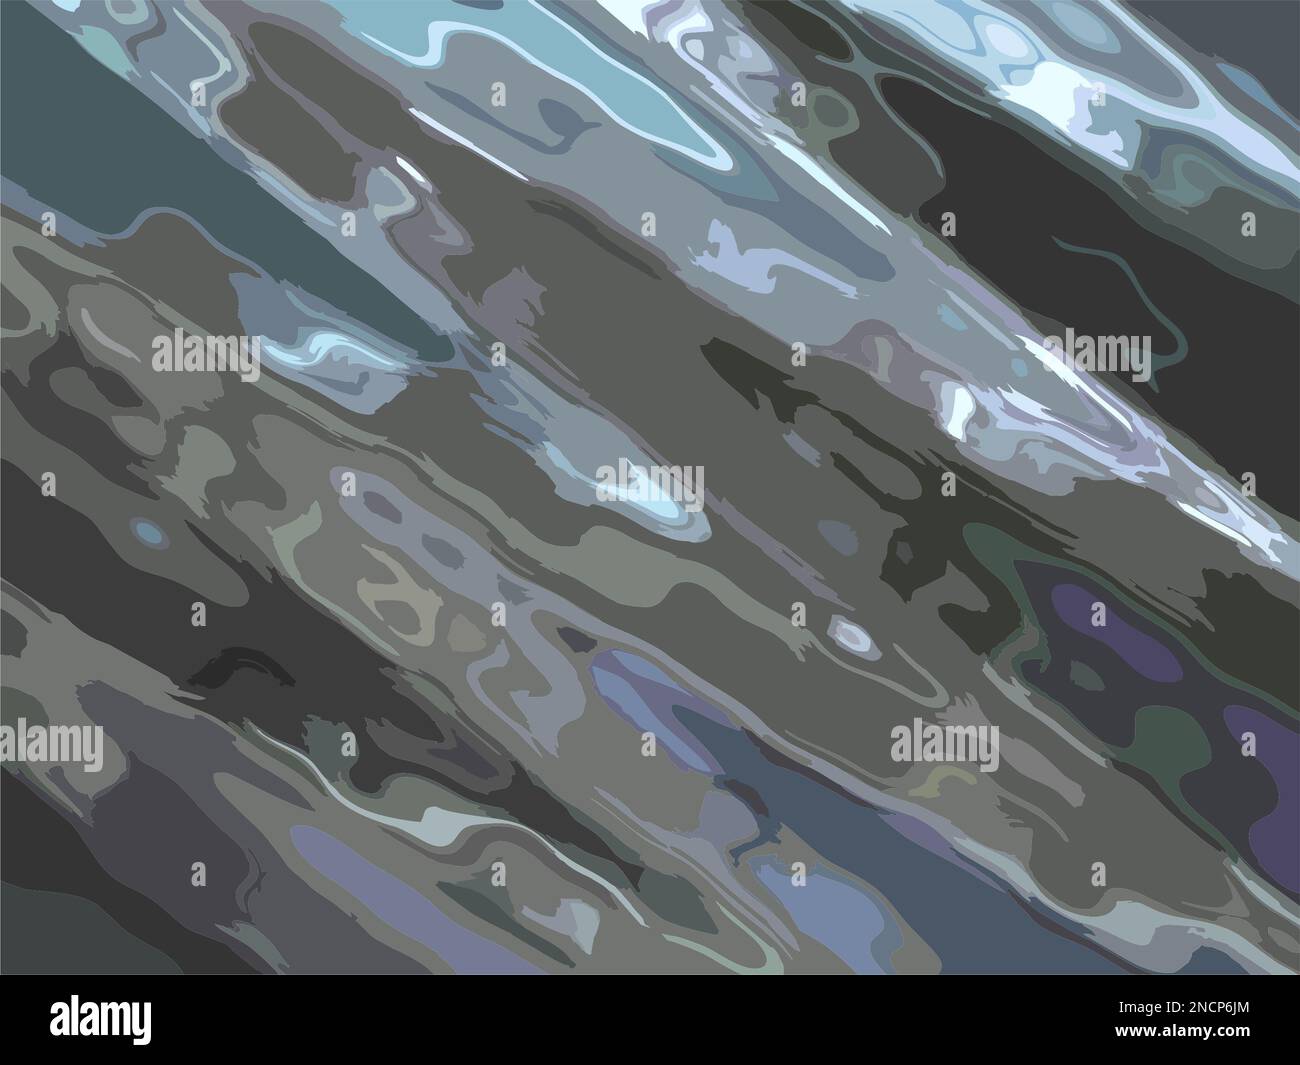 Dark wavy landscape in gray-blue key for backgrounds, textures. Diagonal bursts for covers, fashion trends, fabric, business or environmental concepts Stock Photo